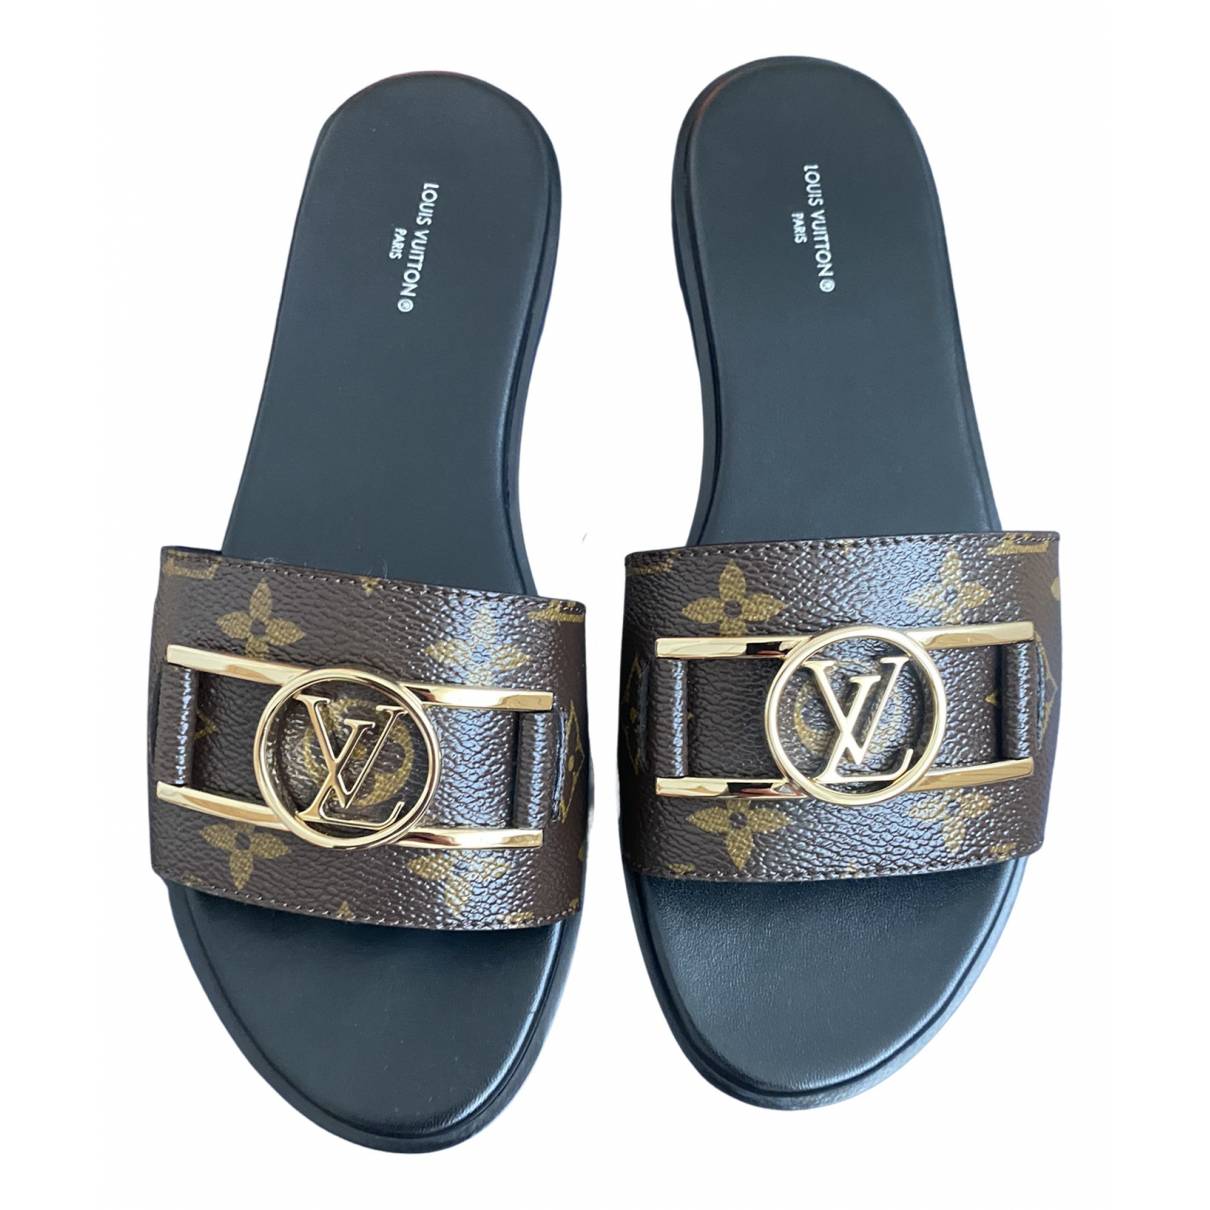 LOUIS VUITTON LOUIS VUITTON Sandals shoes leather Brown Used Women logo LV  size 39 1/2 ｜Product Code：2104102058919｜BRAND OFF Online Store